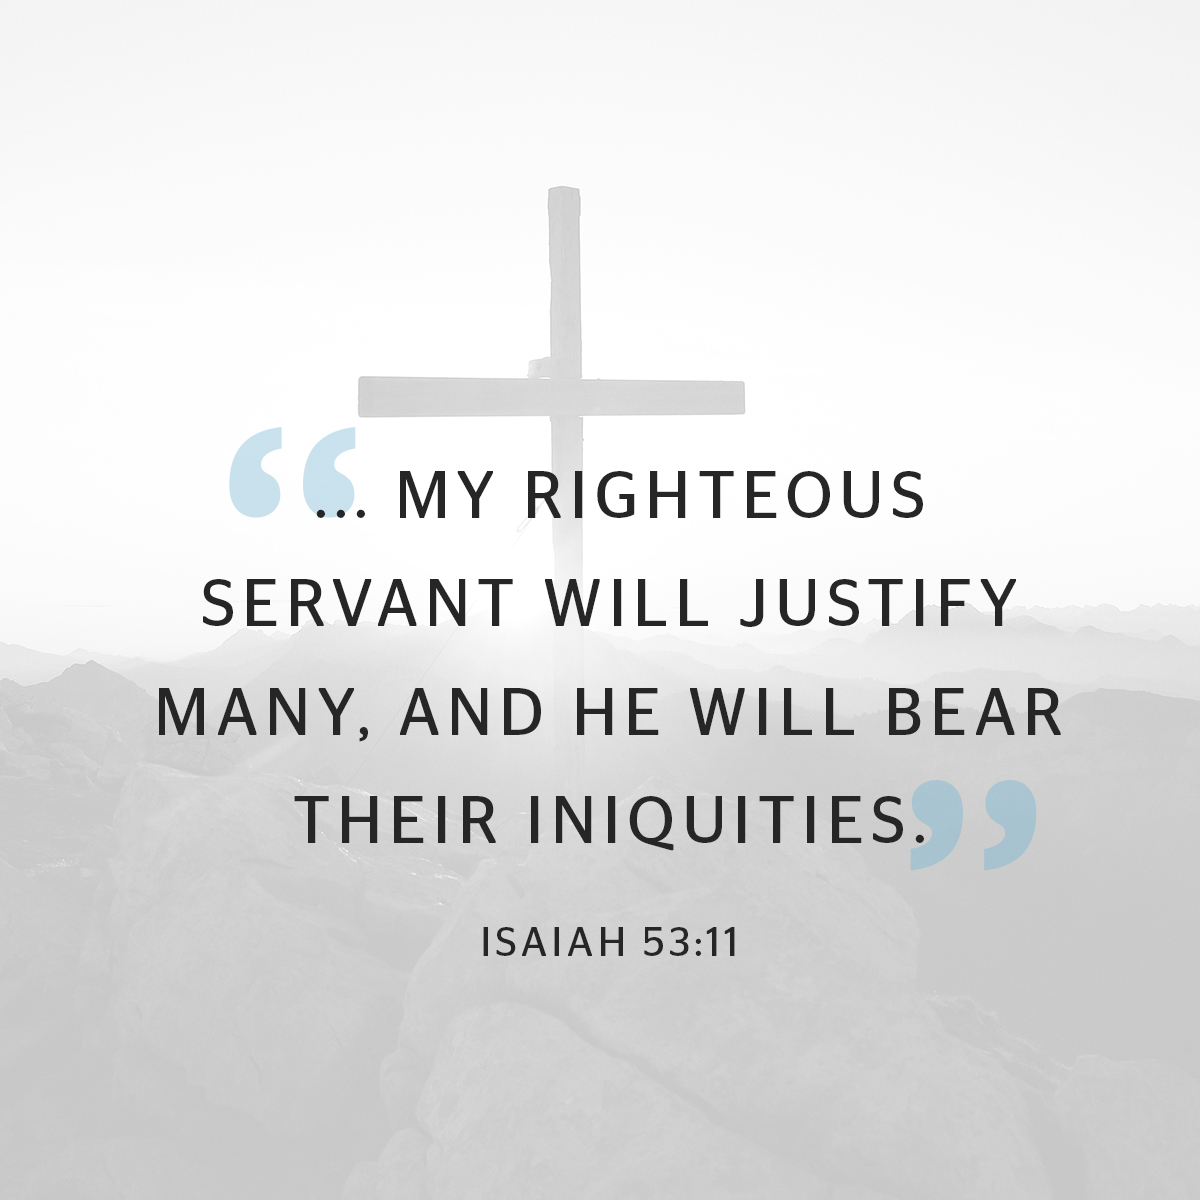 6C MY RIGHTEOUS SERVANT WILL JUSTIFY MANY, AND HE WILL BEAR THEIR INIQUITIES. ) $ ISAIAH 53:11